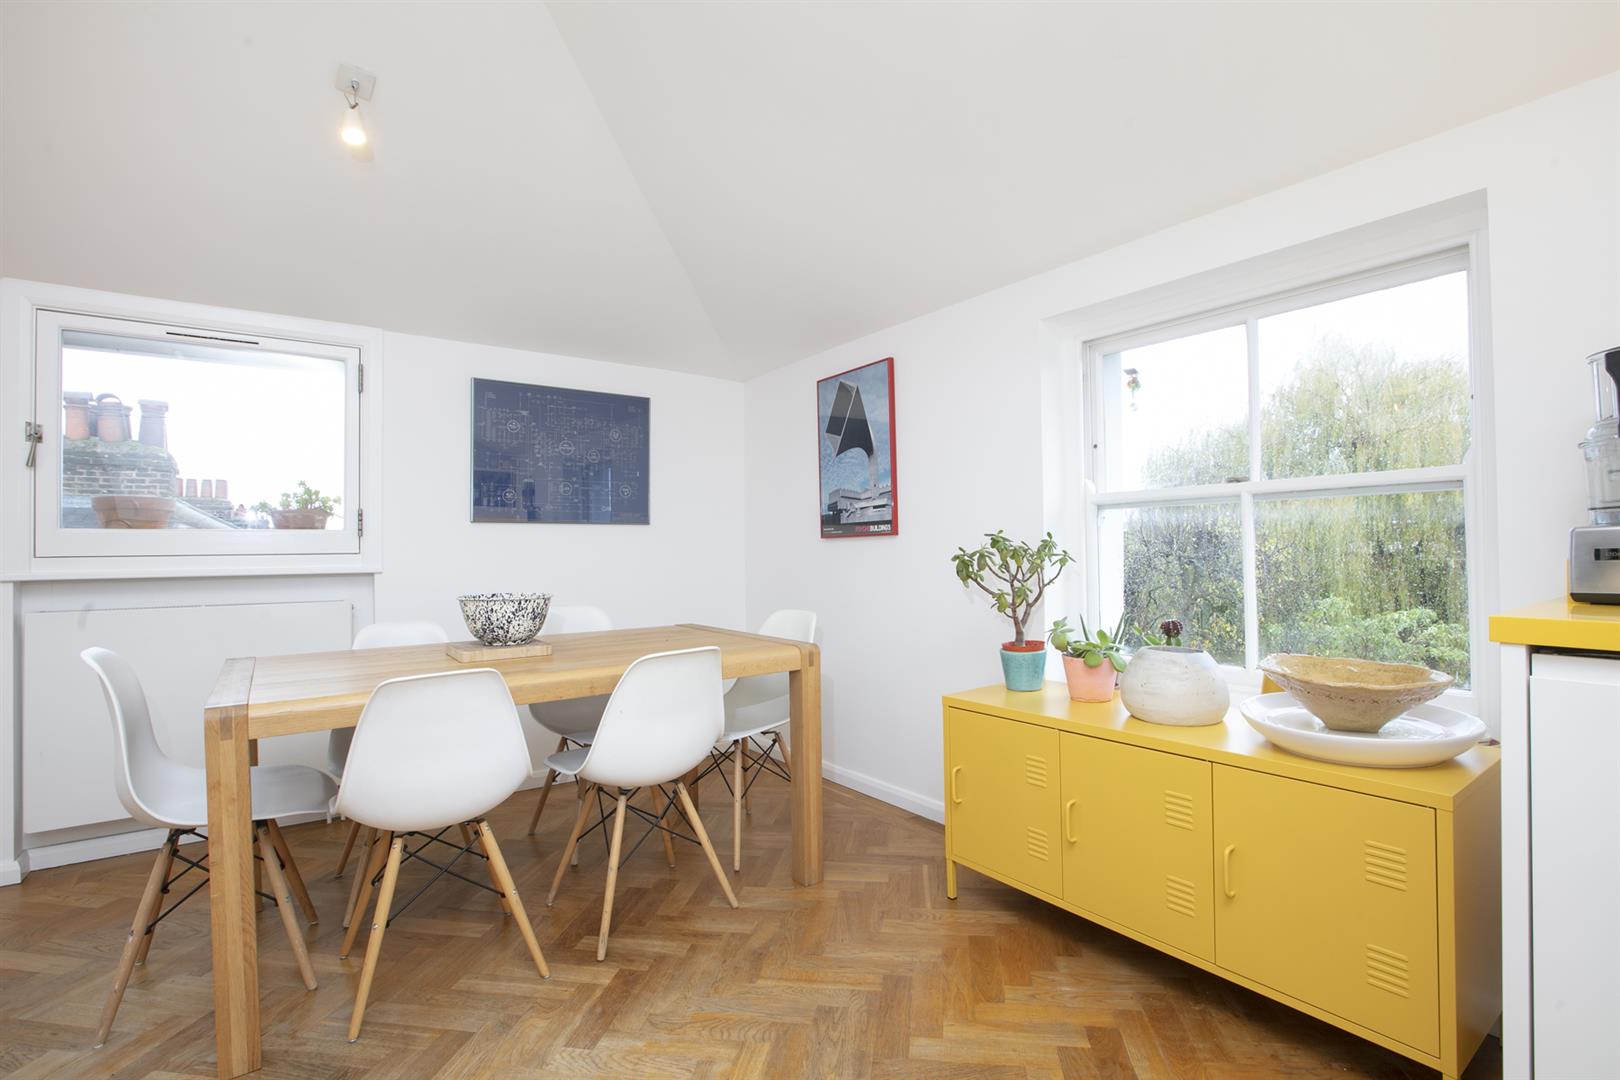 Flat - Conversion For Sale in Holly Grove, Peckham, SE15 893 view22